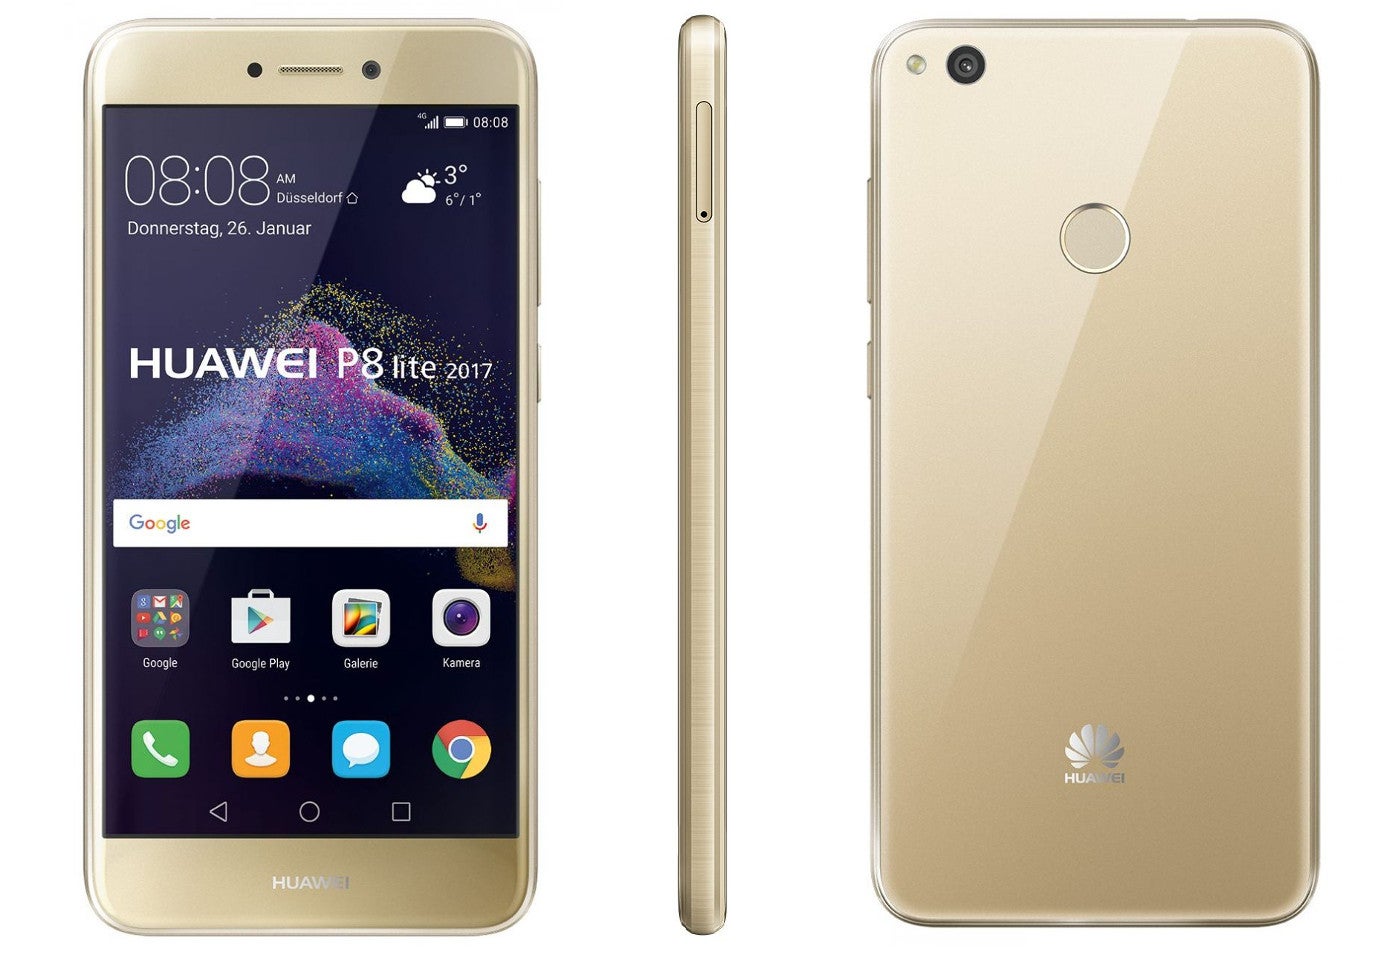 Huawei P8 lite (2017) introduced with Kirin 655 chipset, Android 7.0 Nougat